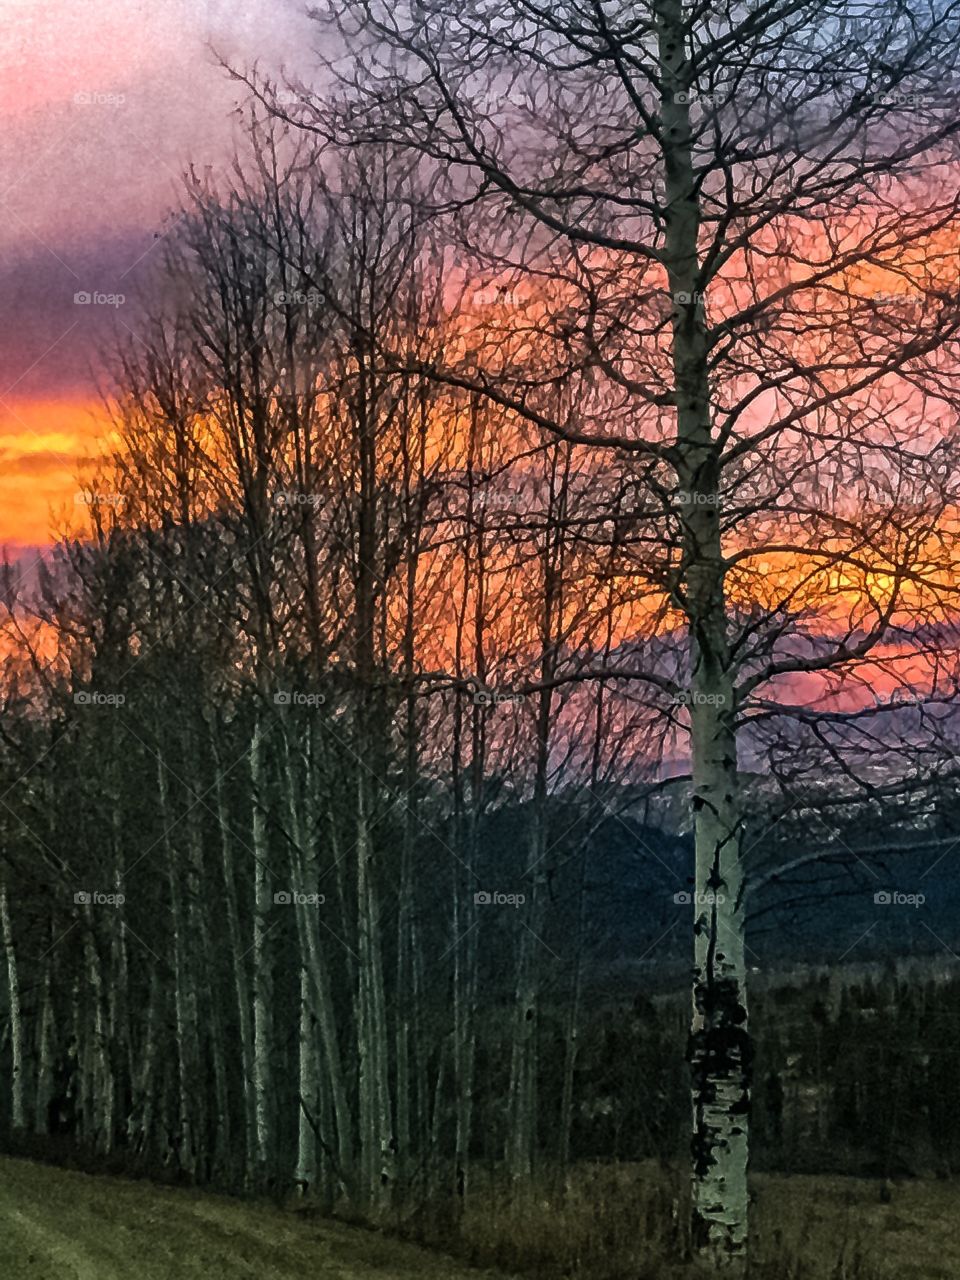 Aspens and Sunsets- looking out over the valley with a thick row of aspen trees in the foreground and the sun setting beautifully behind the distant Rocky Mountains.